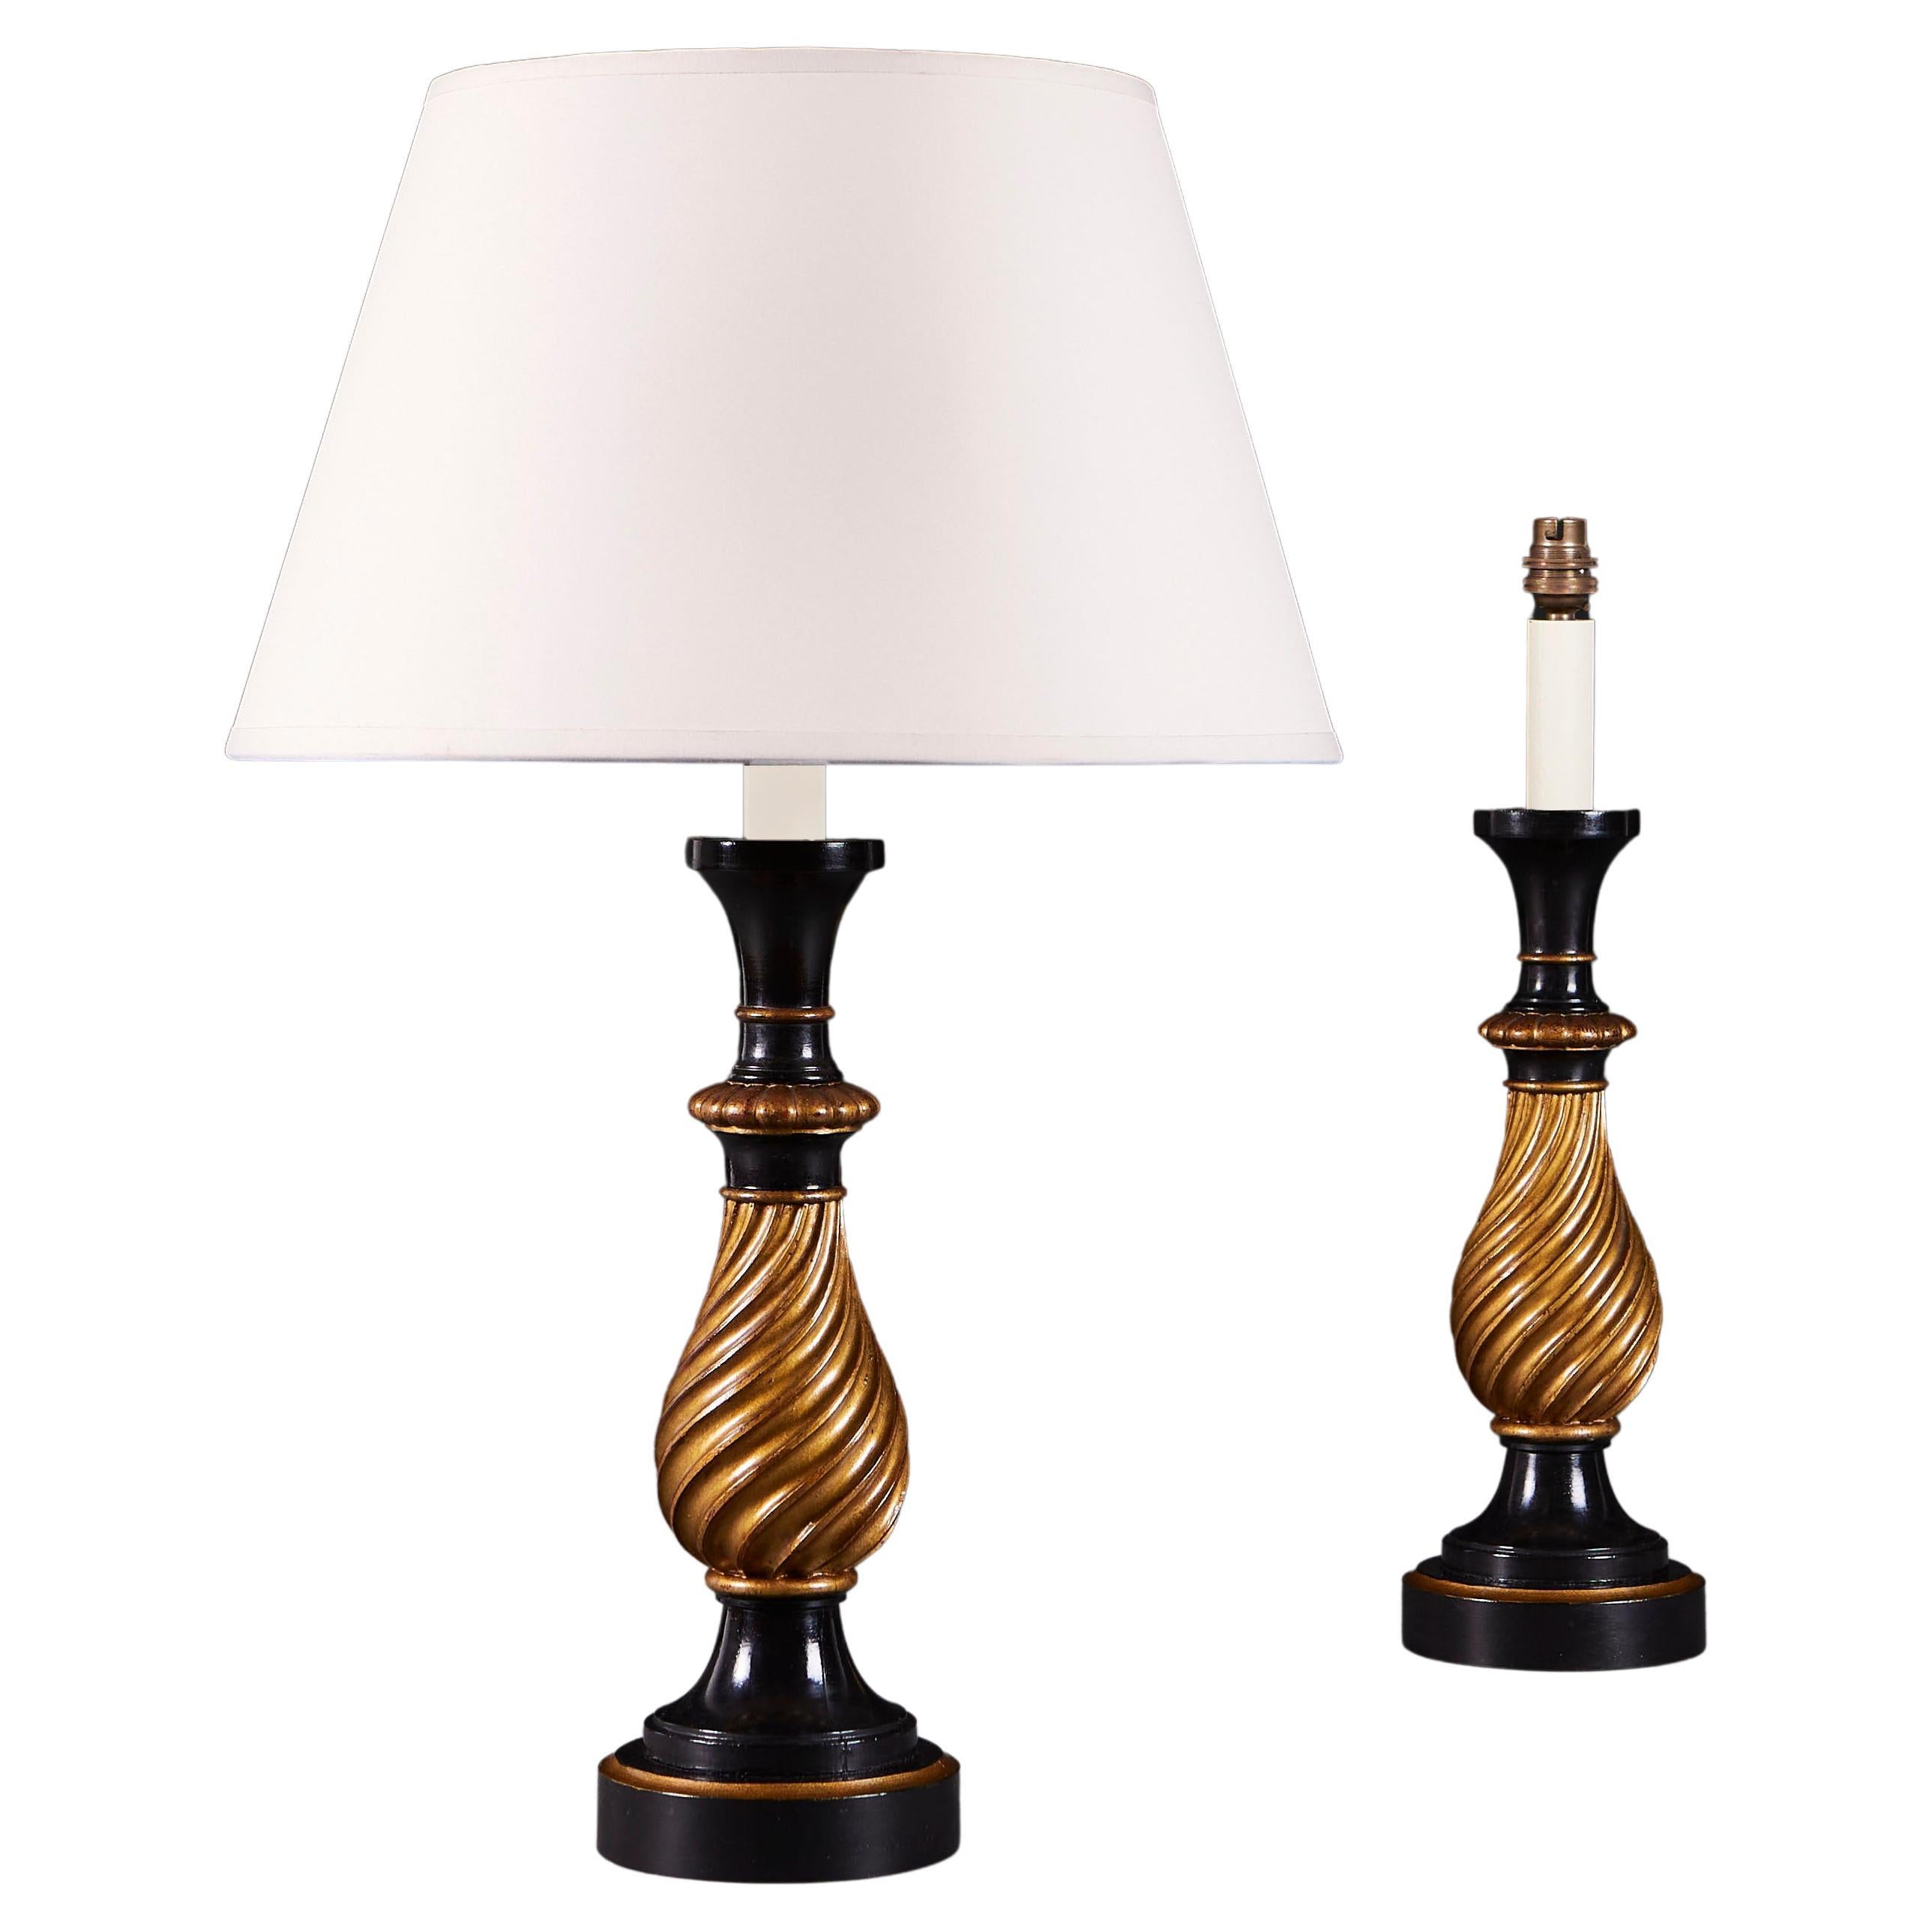 A Pair of Gilded Spiral Baluster Lamps For Sale